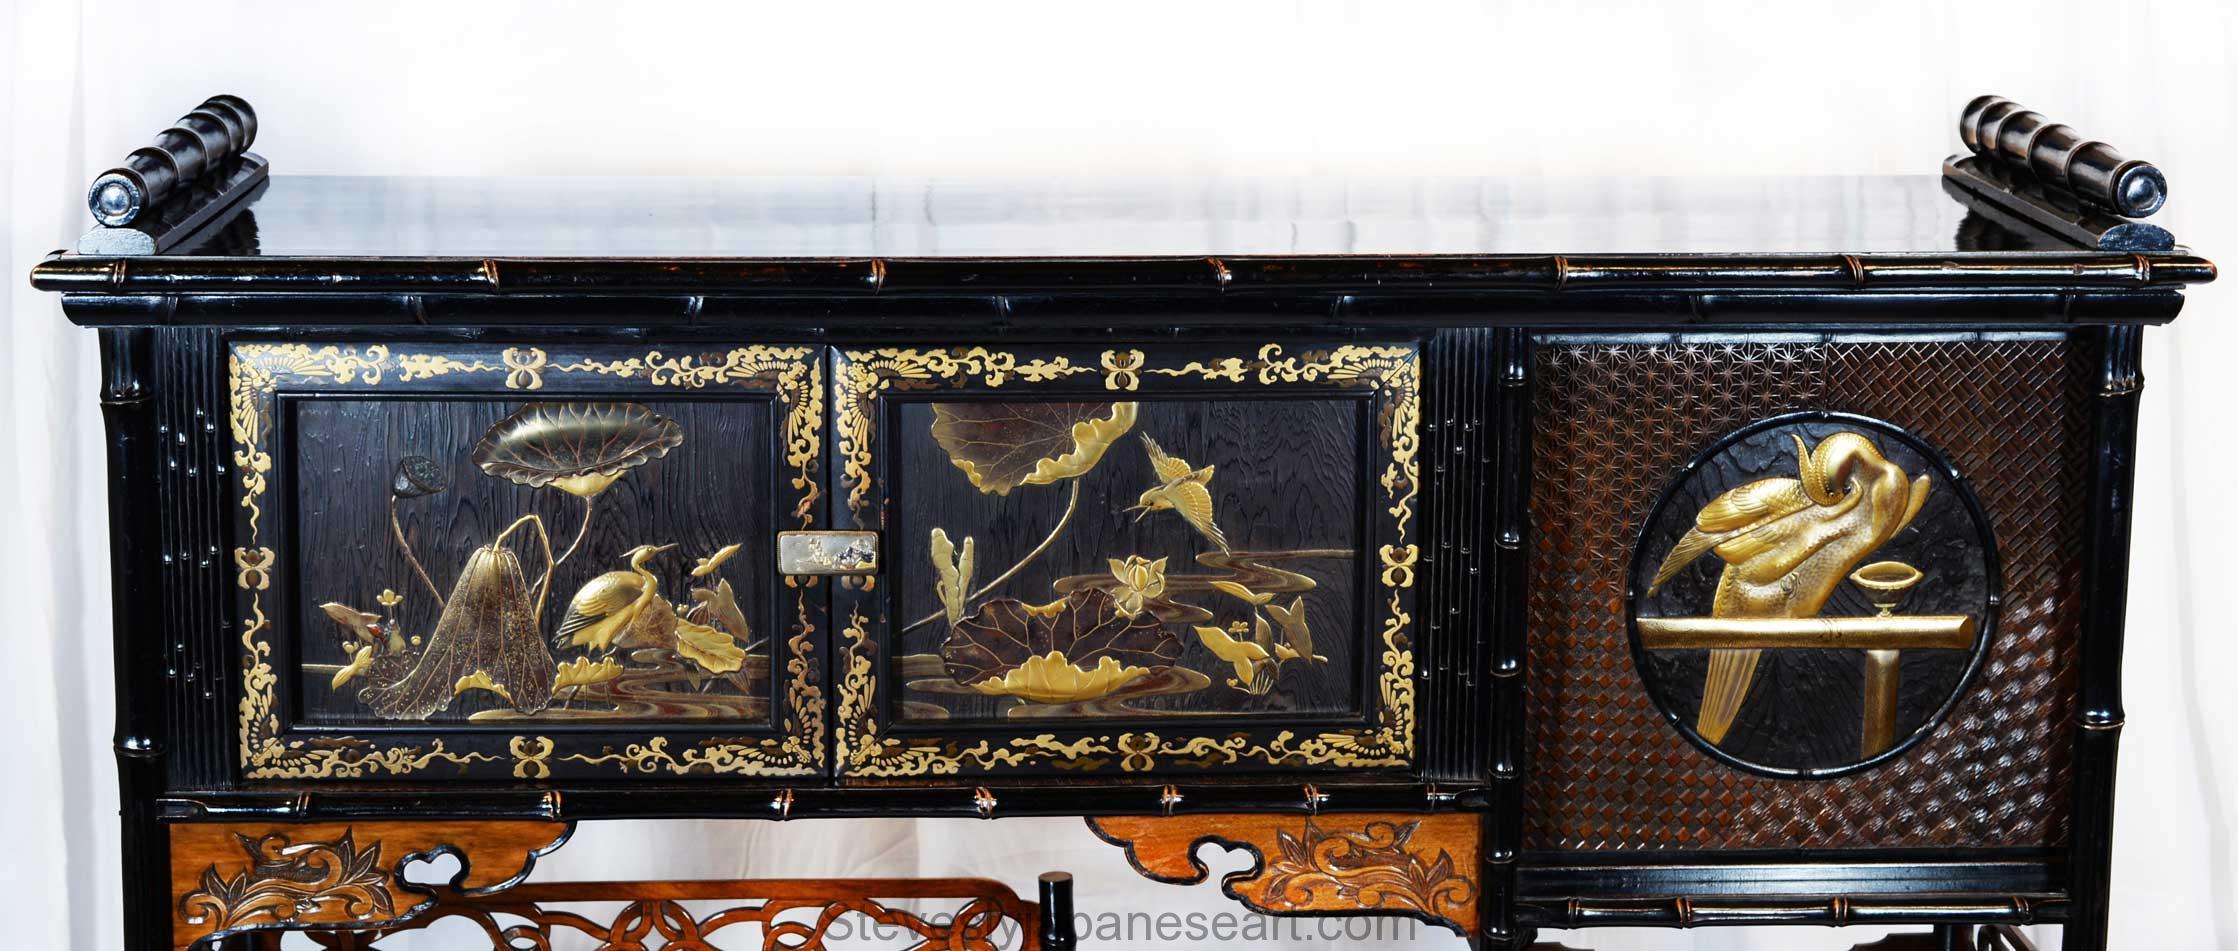 Delightful Japanese Bamboo Form Gold Lacquer Kazaridana Cabinet For Sale 3